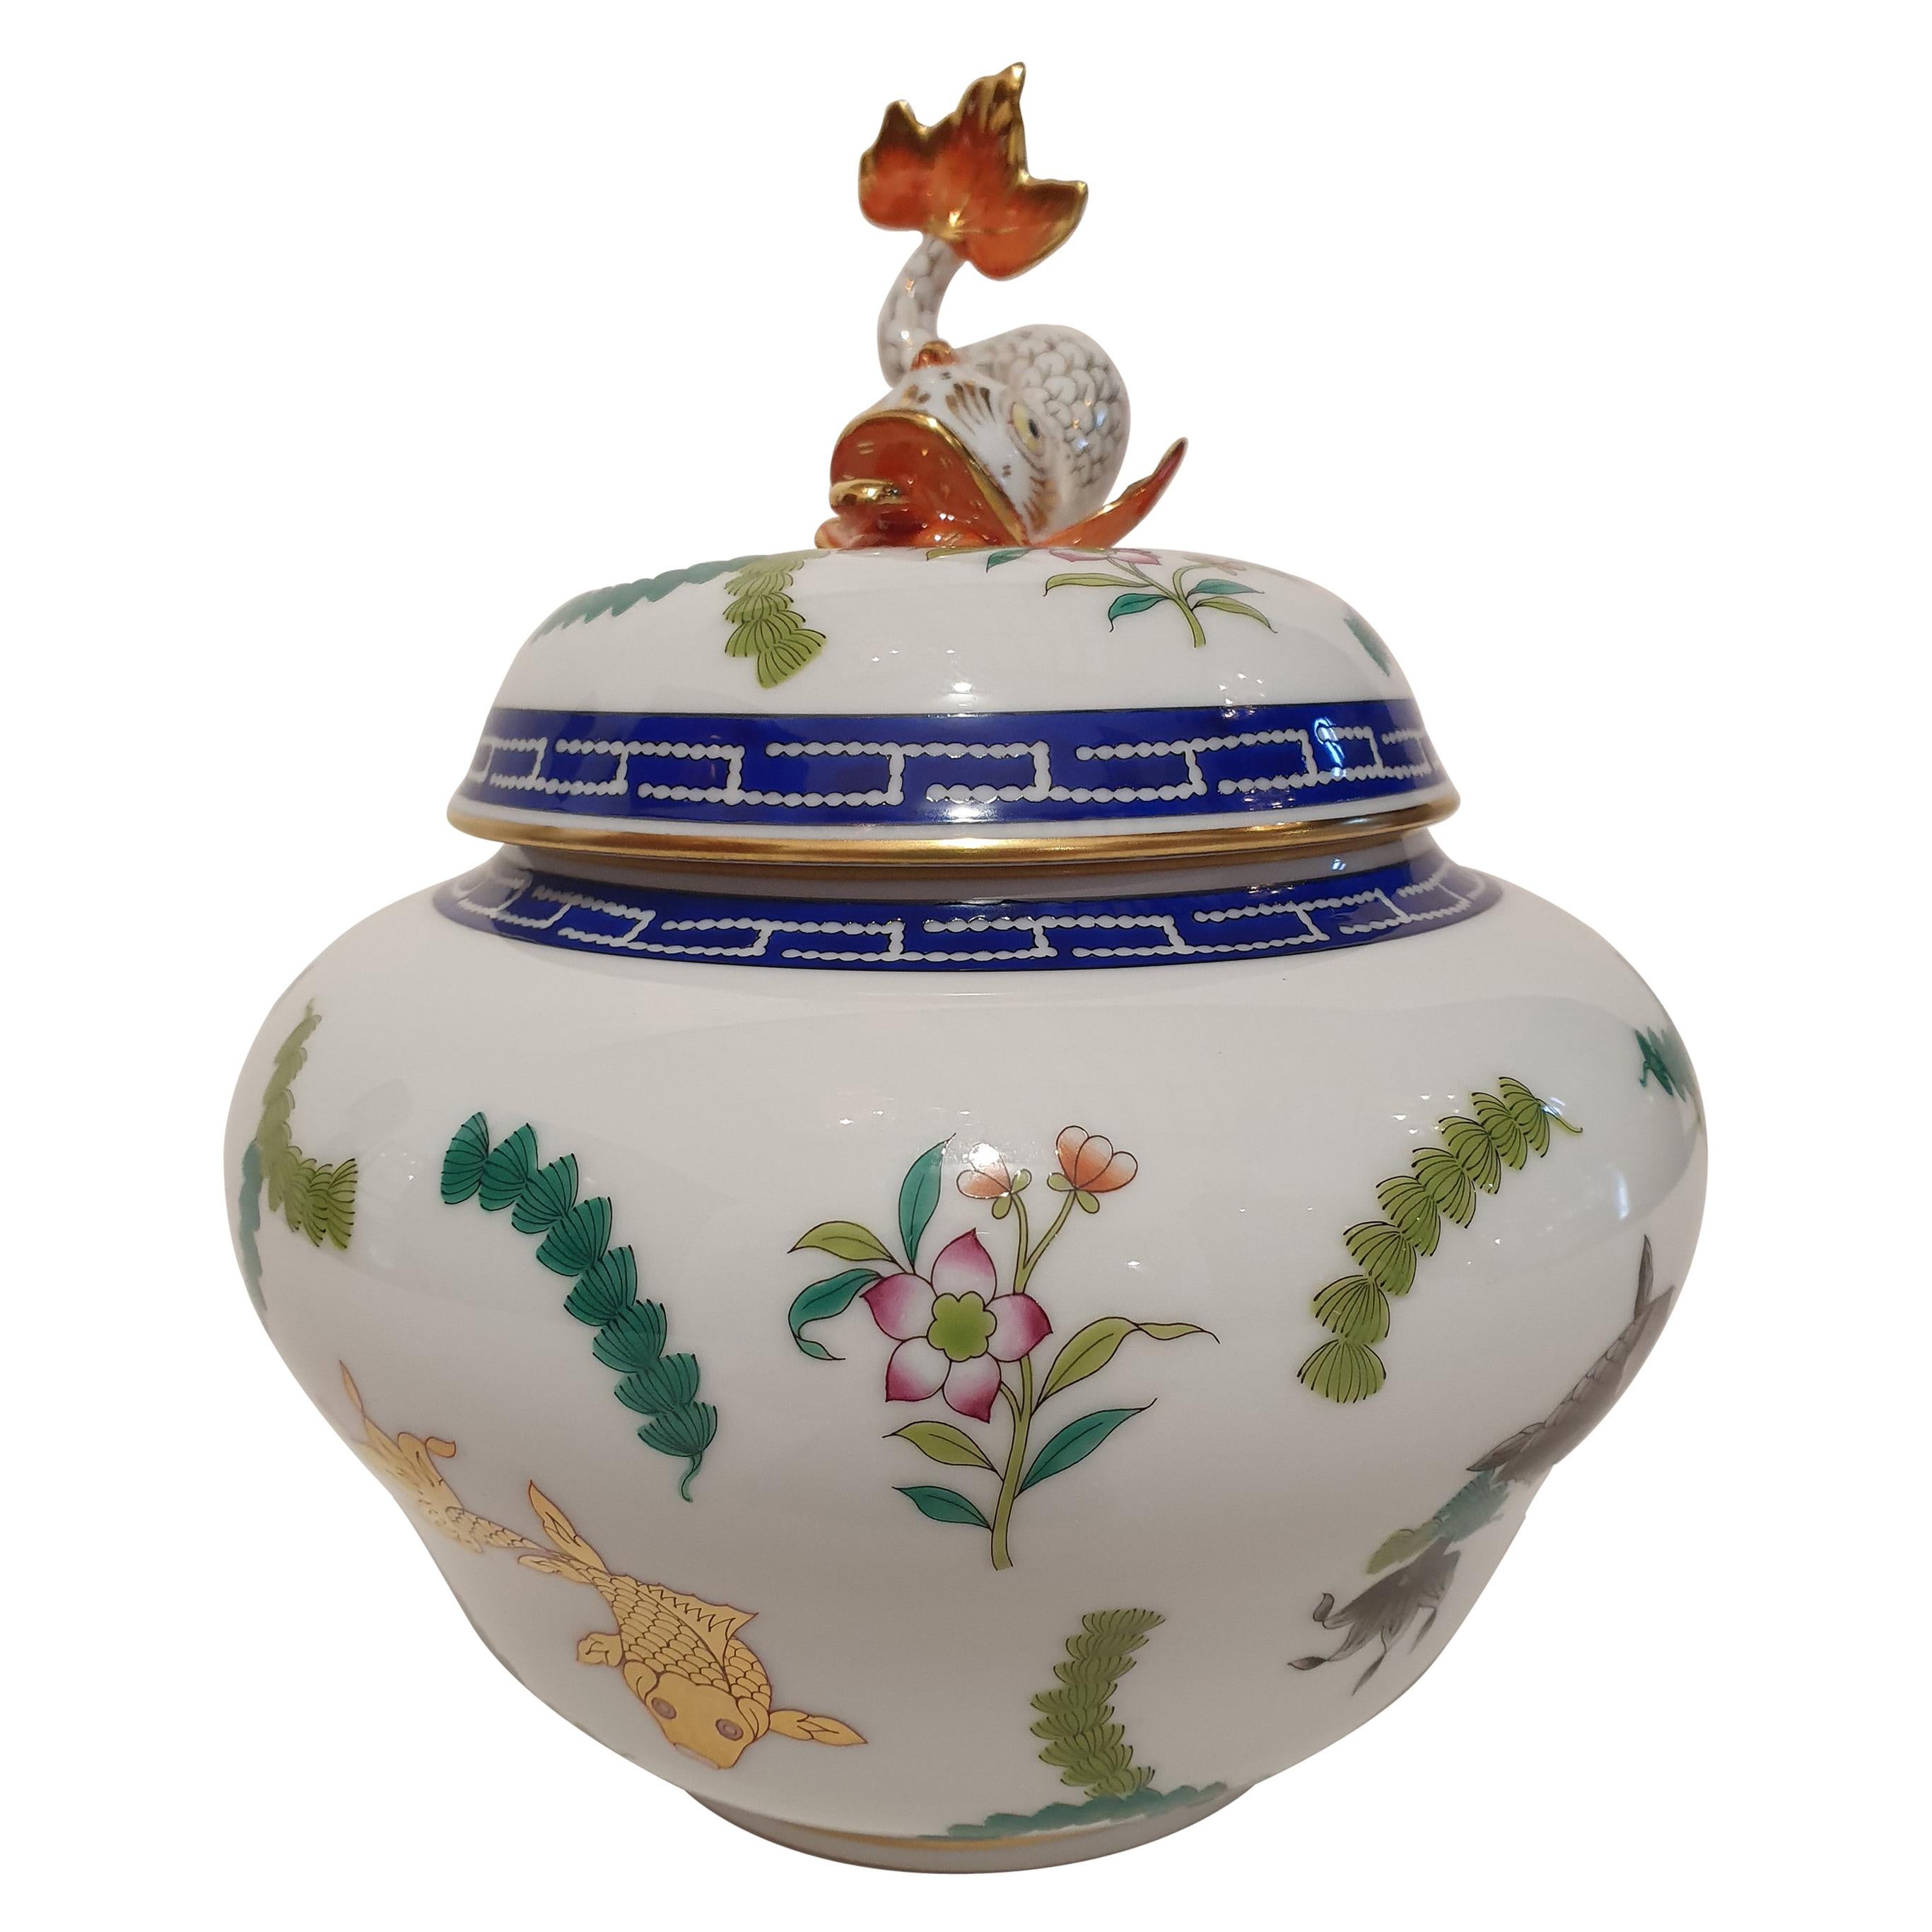 Herend "Poisson" Hand Painted Polychrome Porcelain Potiche, Hungary, Modern